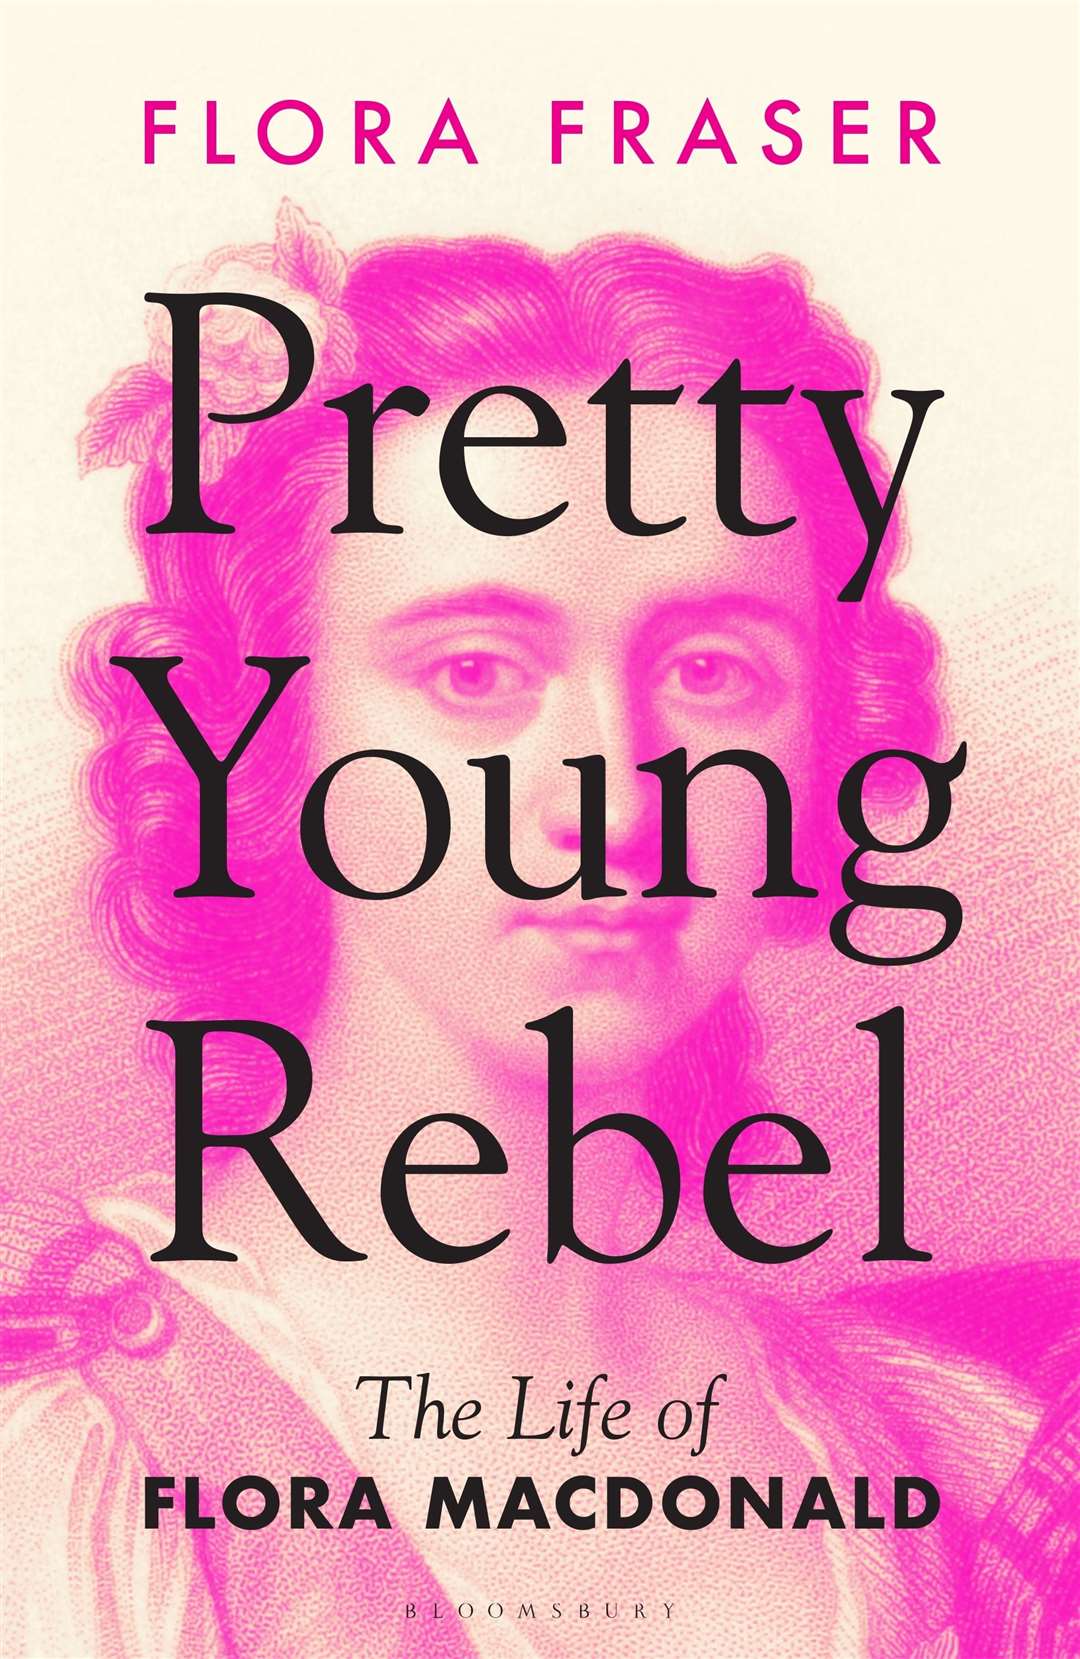 Pretty Young Rebel, the story of Flora Macdonald's life with transatlantic adventures.